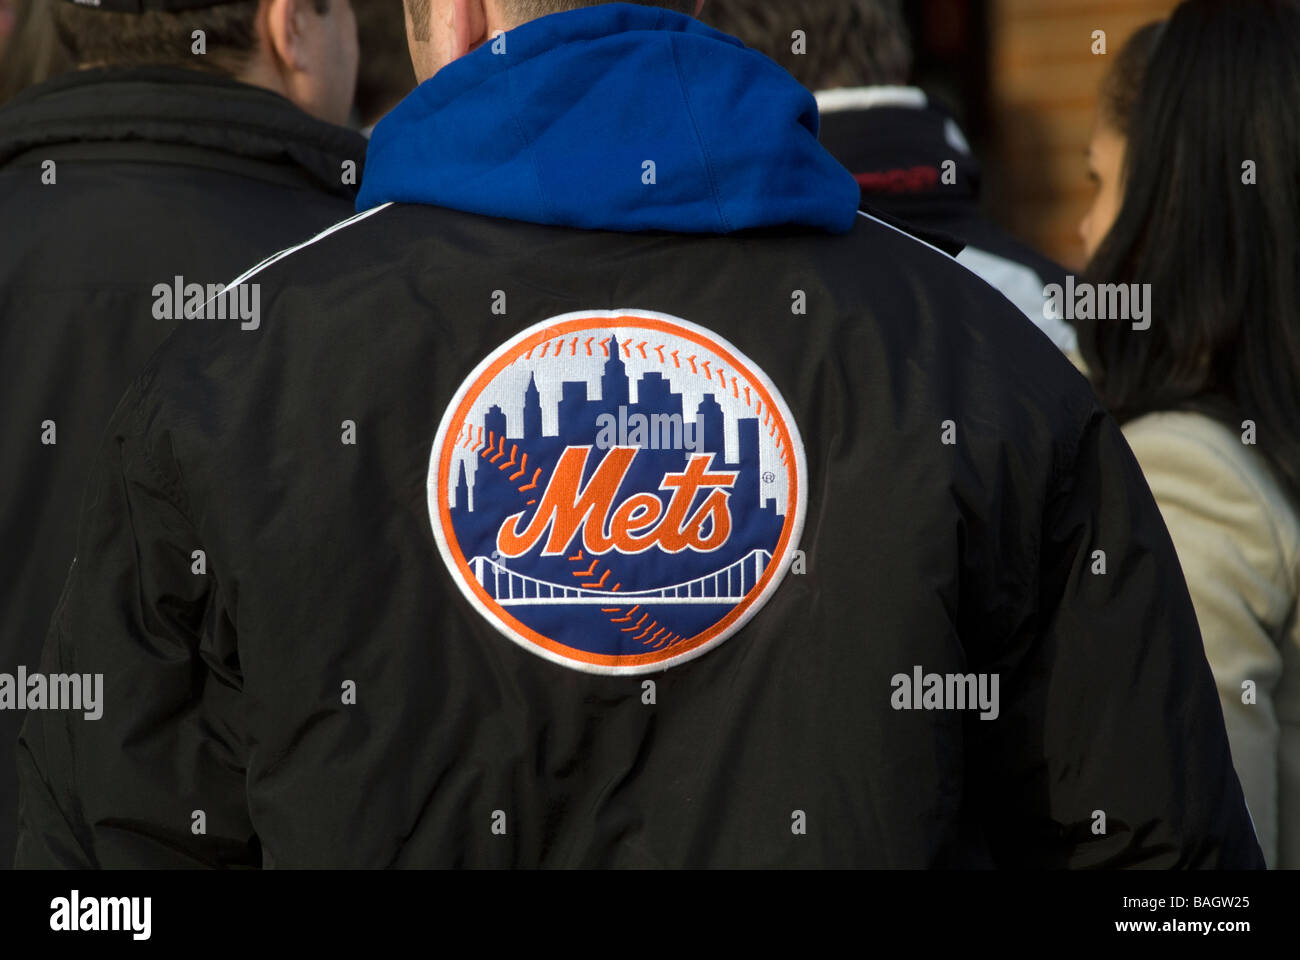 Fans at CitiField in Flushing Queens in New York Stock Photo